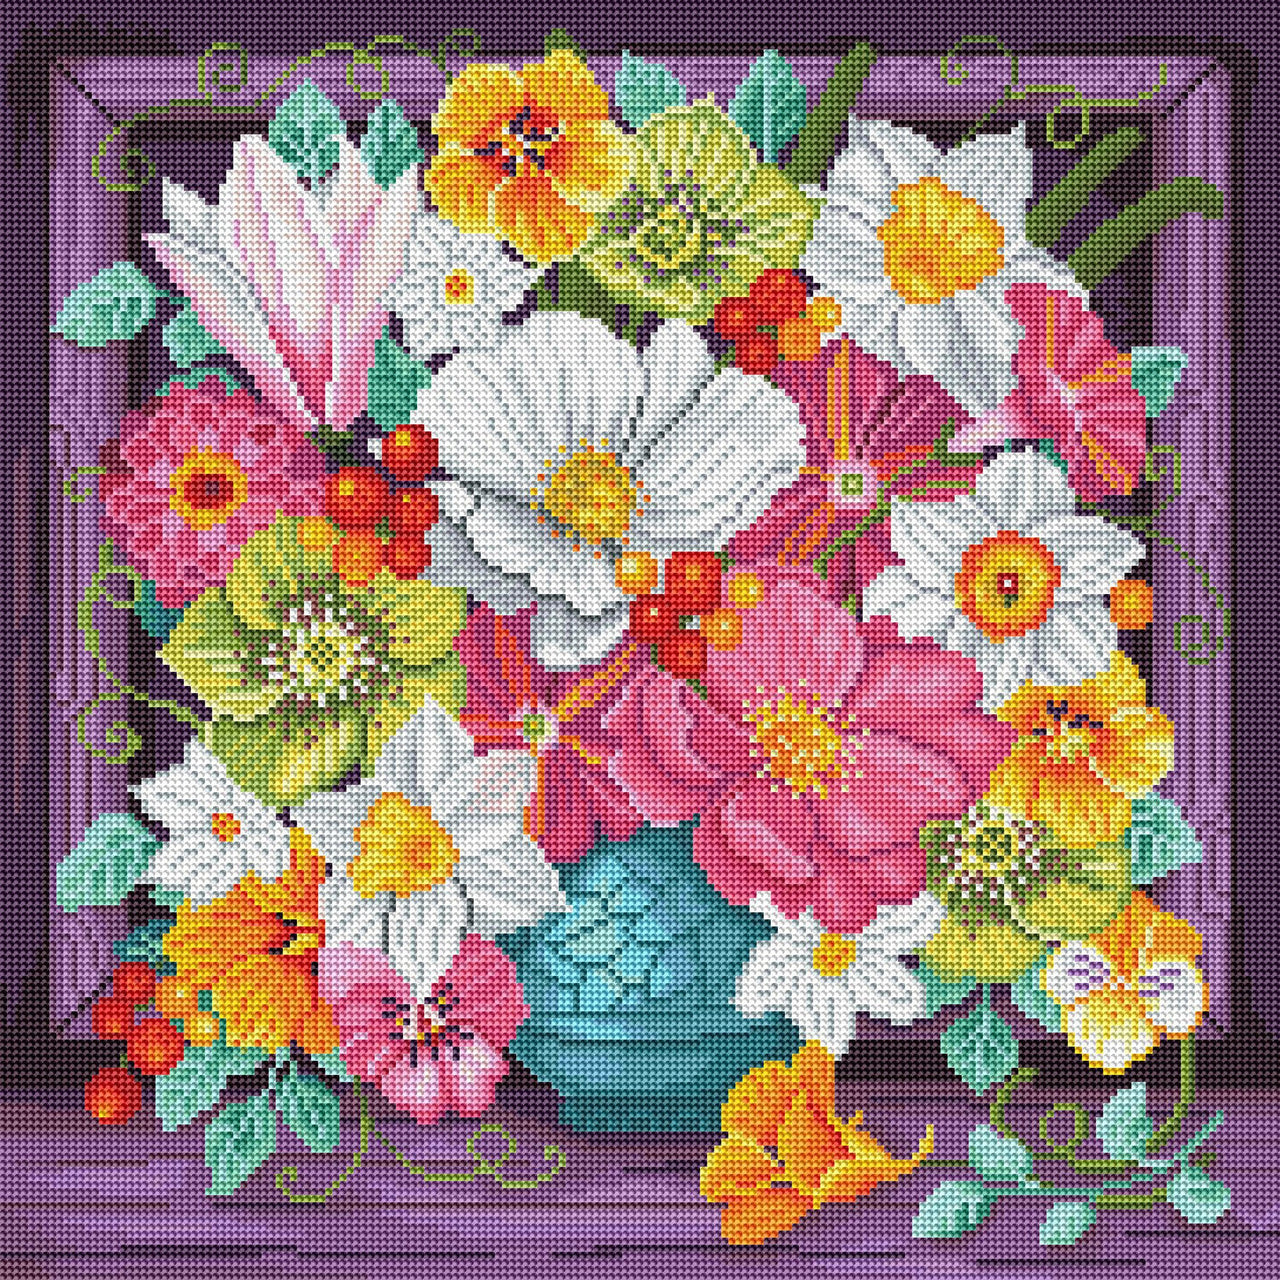 Diamond Painting Happy Flowers Blue Vase 20" x 20" (50.7cm x 50.7cm) / Round with 52 Colors including 5 ABs / 32,761